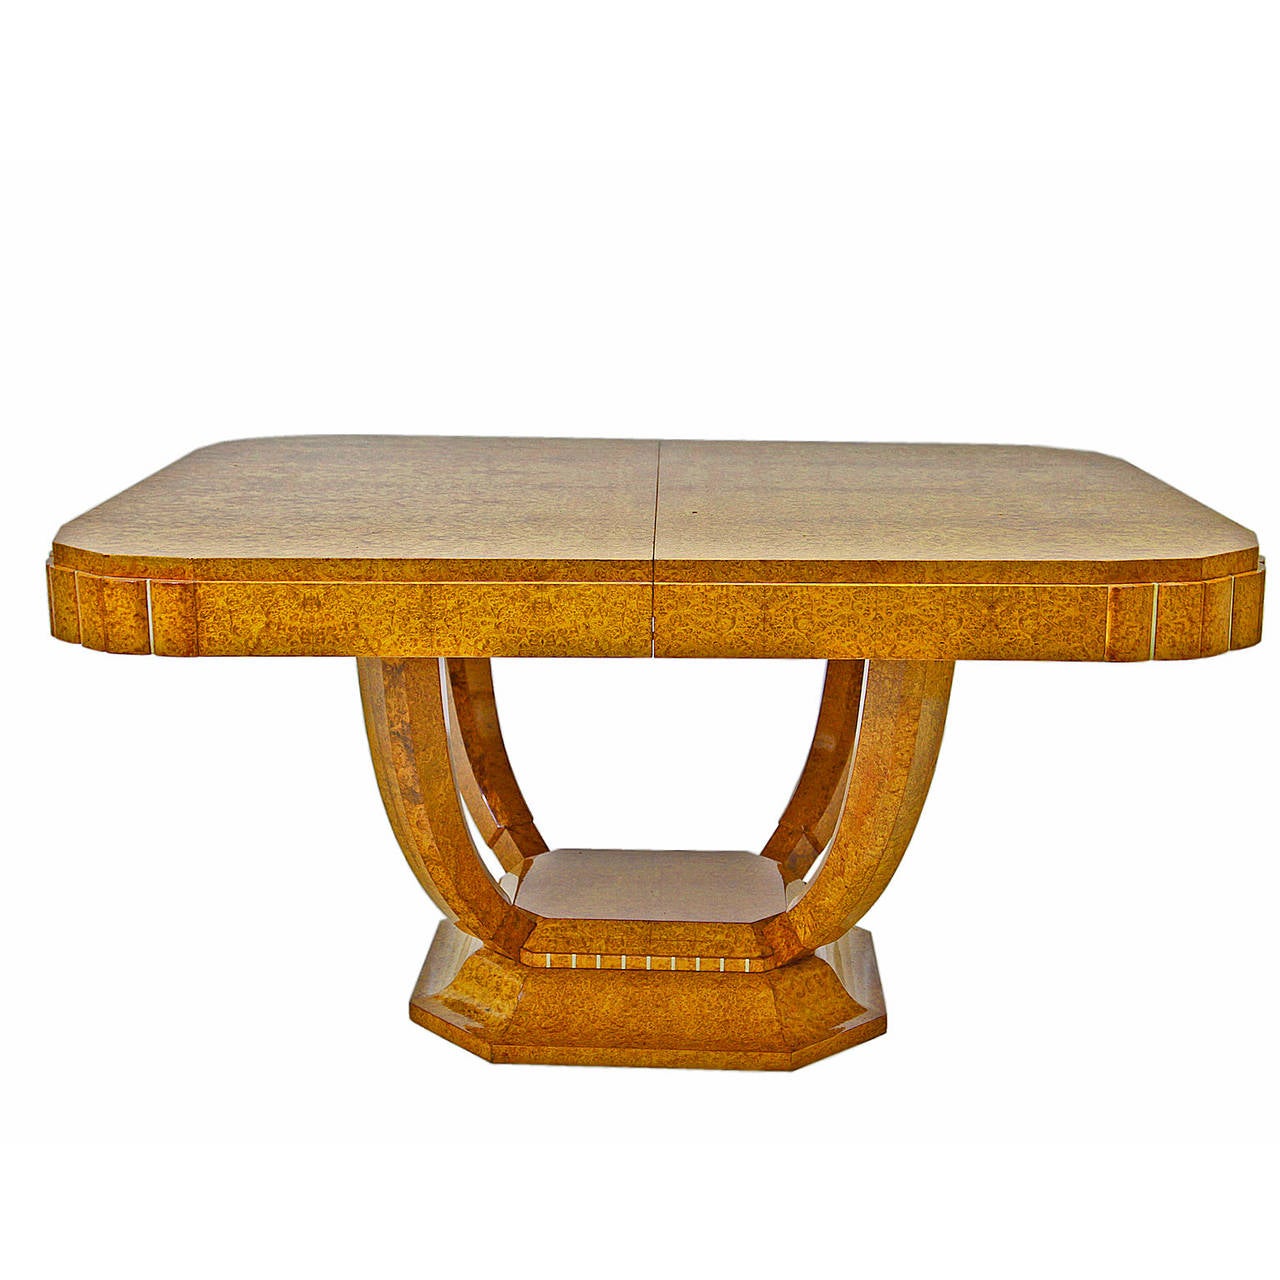 Gorgeous french Art Deco Table in style of Maurice Dufrene, dating from the 1920's .
Thuja burlwood.
Dimension with the white extension board HxWxD: 30 x 81.1 x 45.3 inches    (76 x 206 x 115 cm).